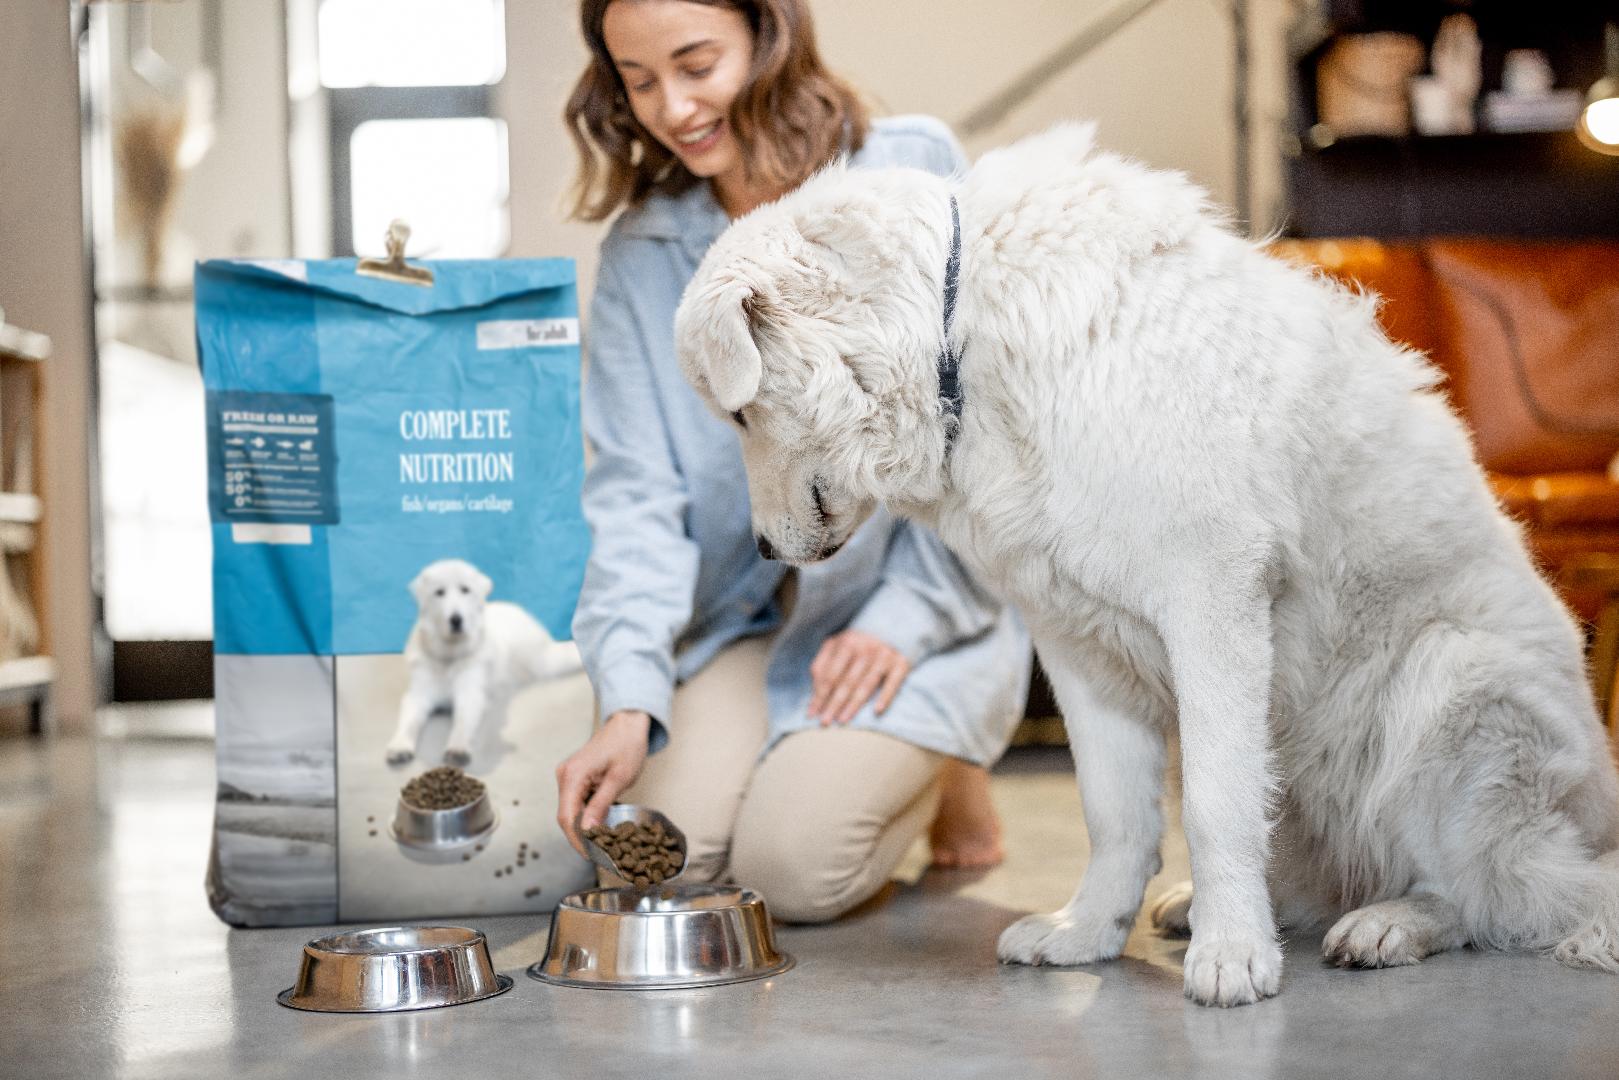 The DTC market is growing exponentially in the pet food industry